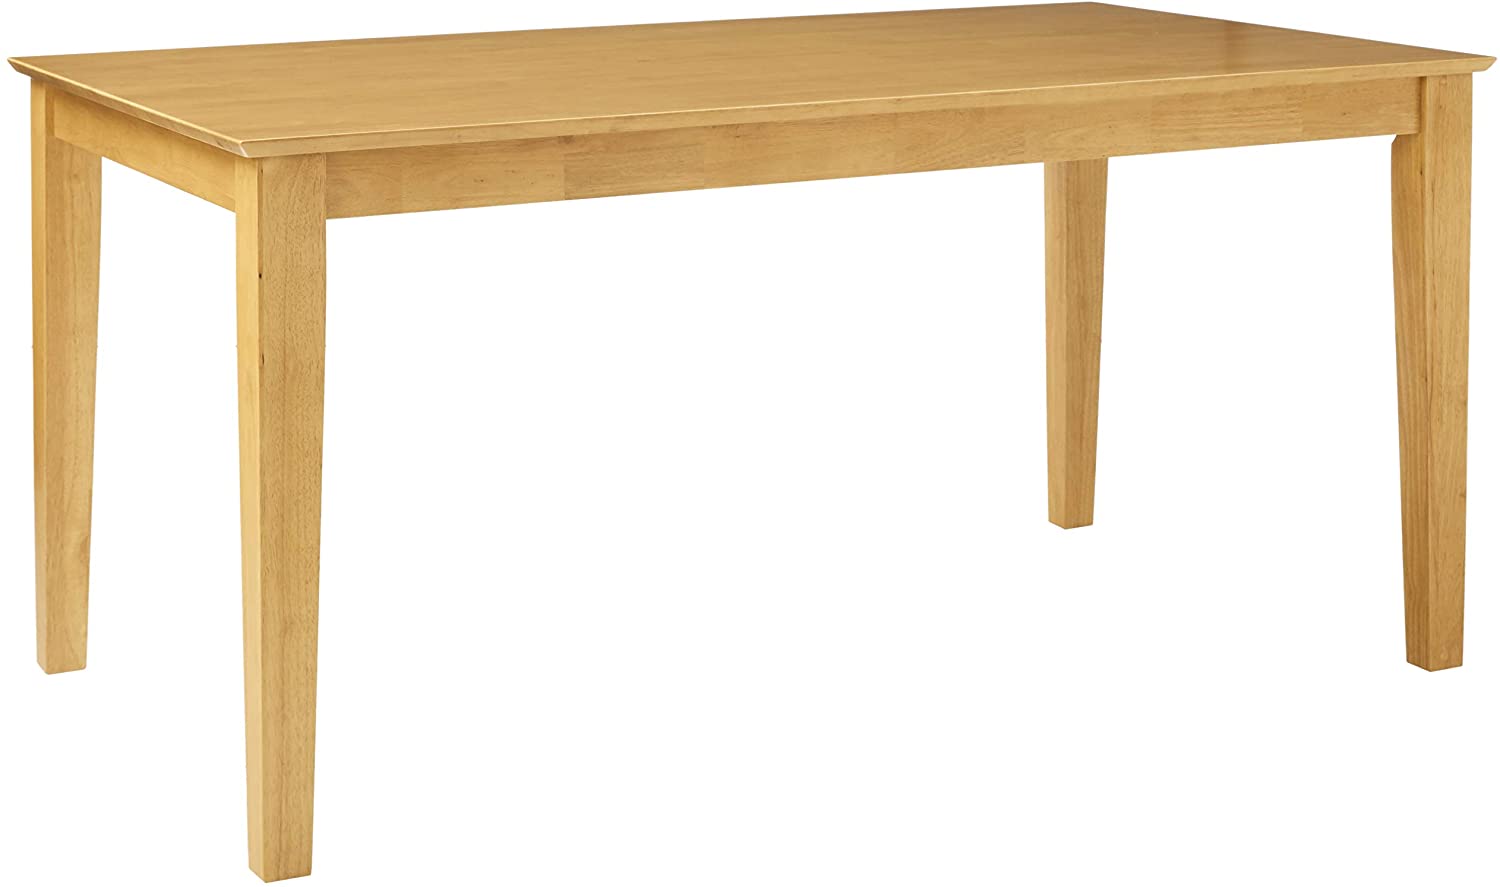 B00TV4781U East West Furniture Oak-S CAT S Rectangular Dining Table with Solid Wood Top, 36 60-Inch, Inch Inch